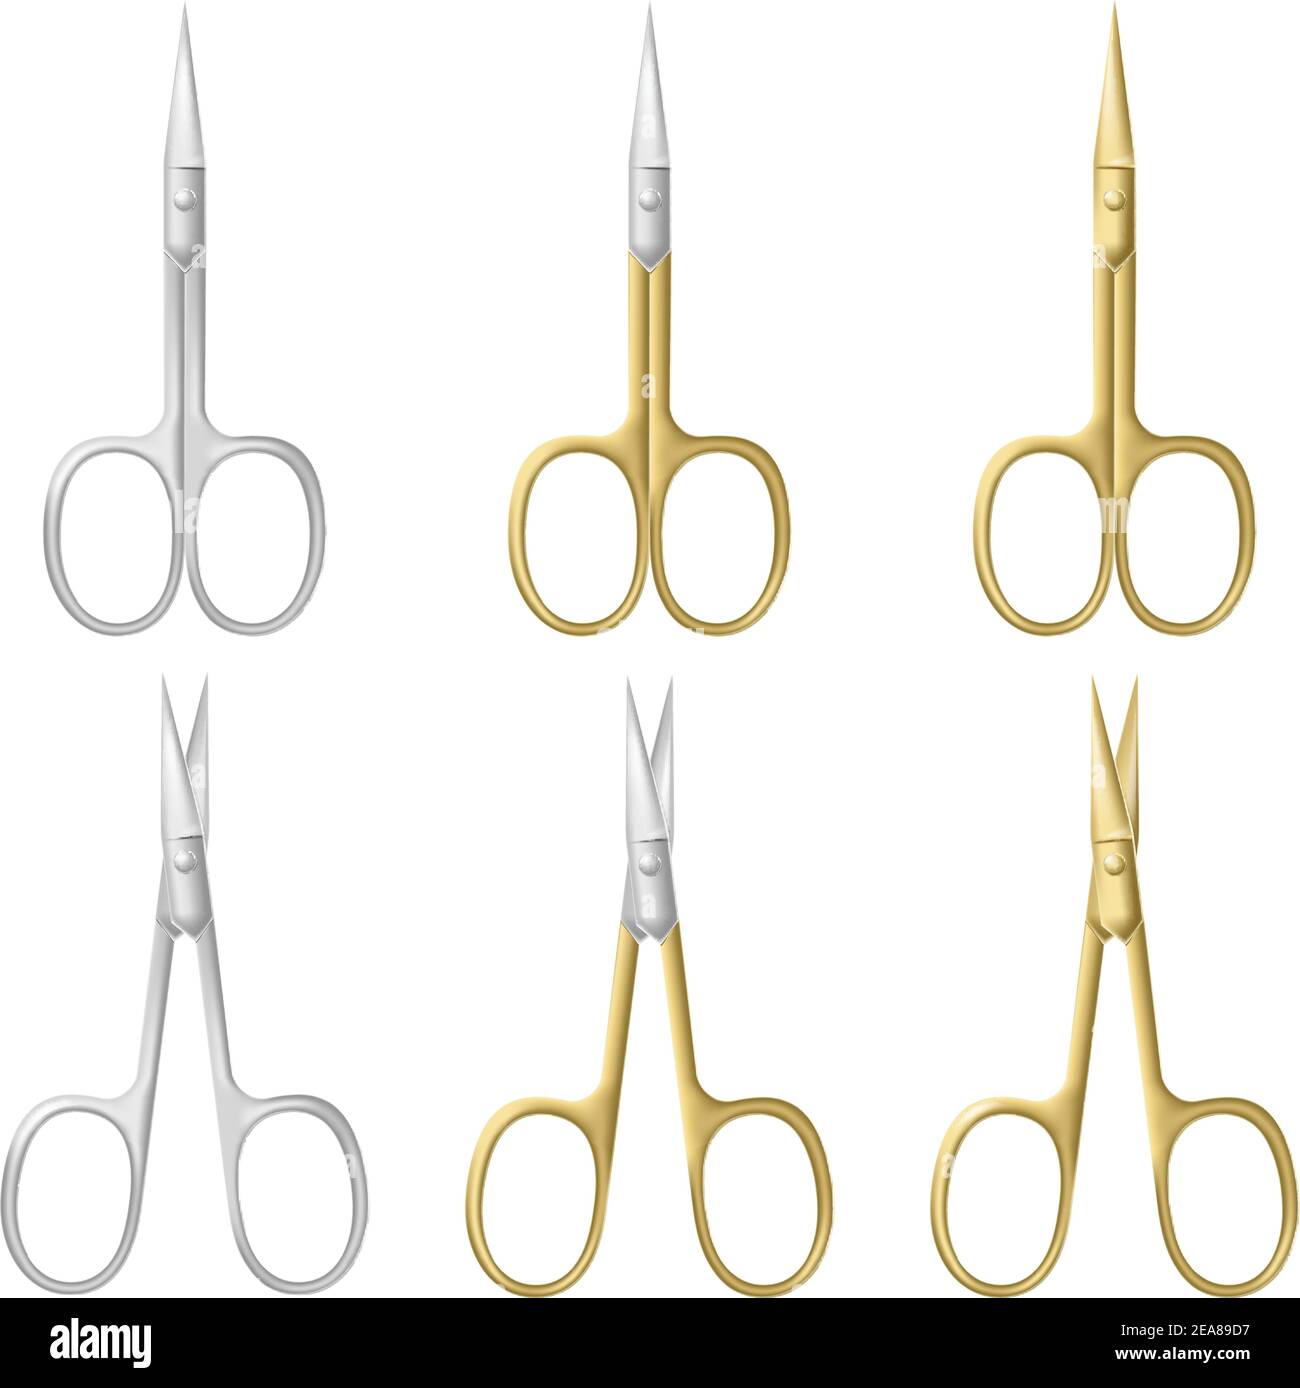 Set of manicure / pedicure scissors isolated on white background. Photo-realistic vector illustration. Stock Vector